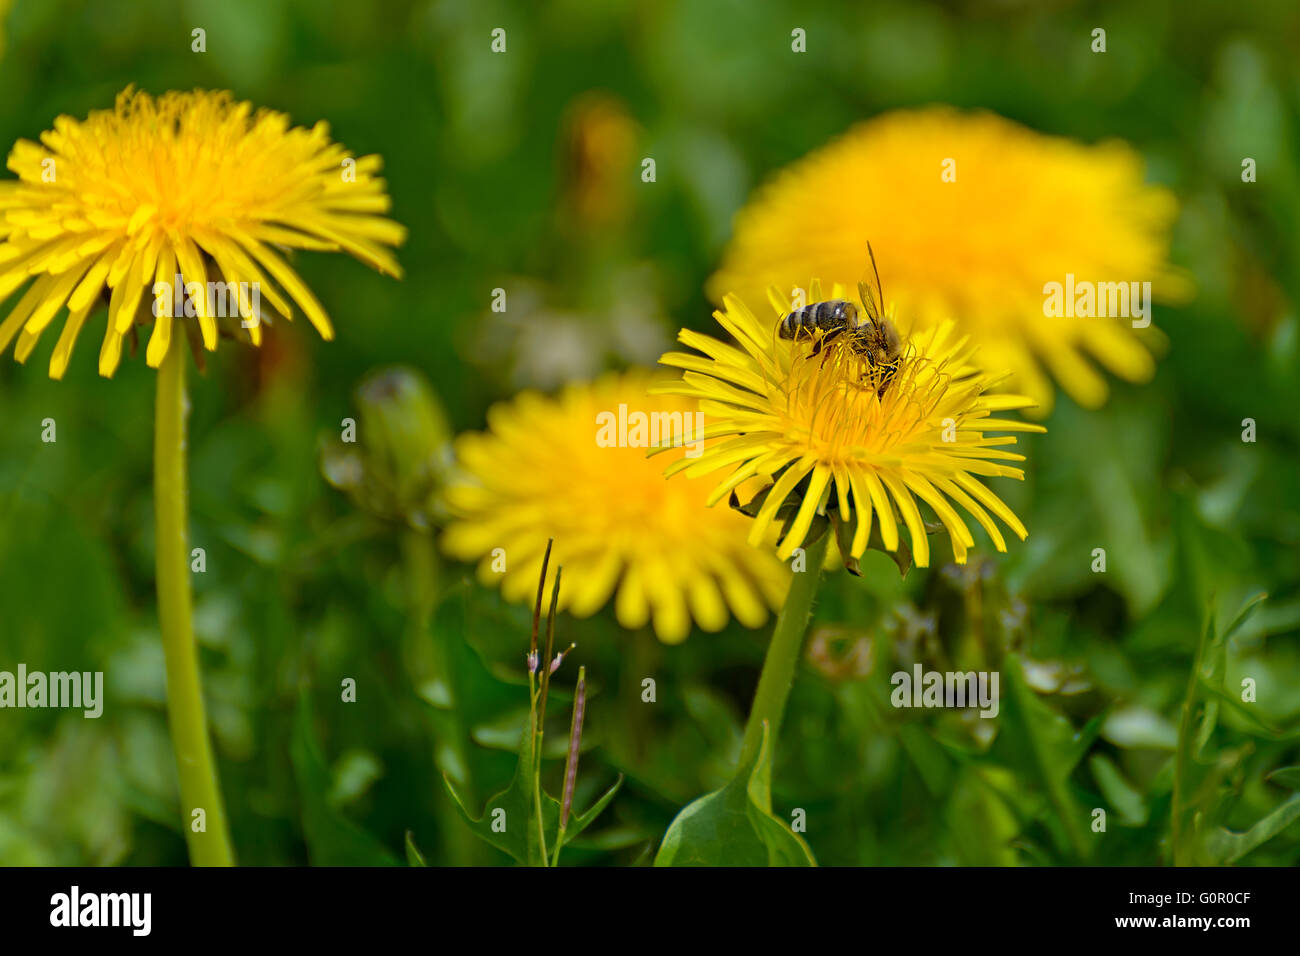 A bee gathers nectar from a dandelion flower Stock Photo